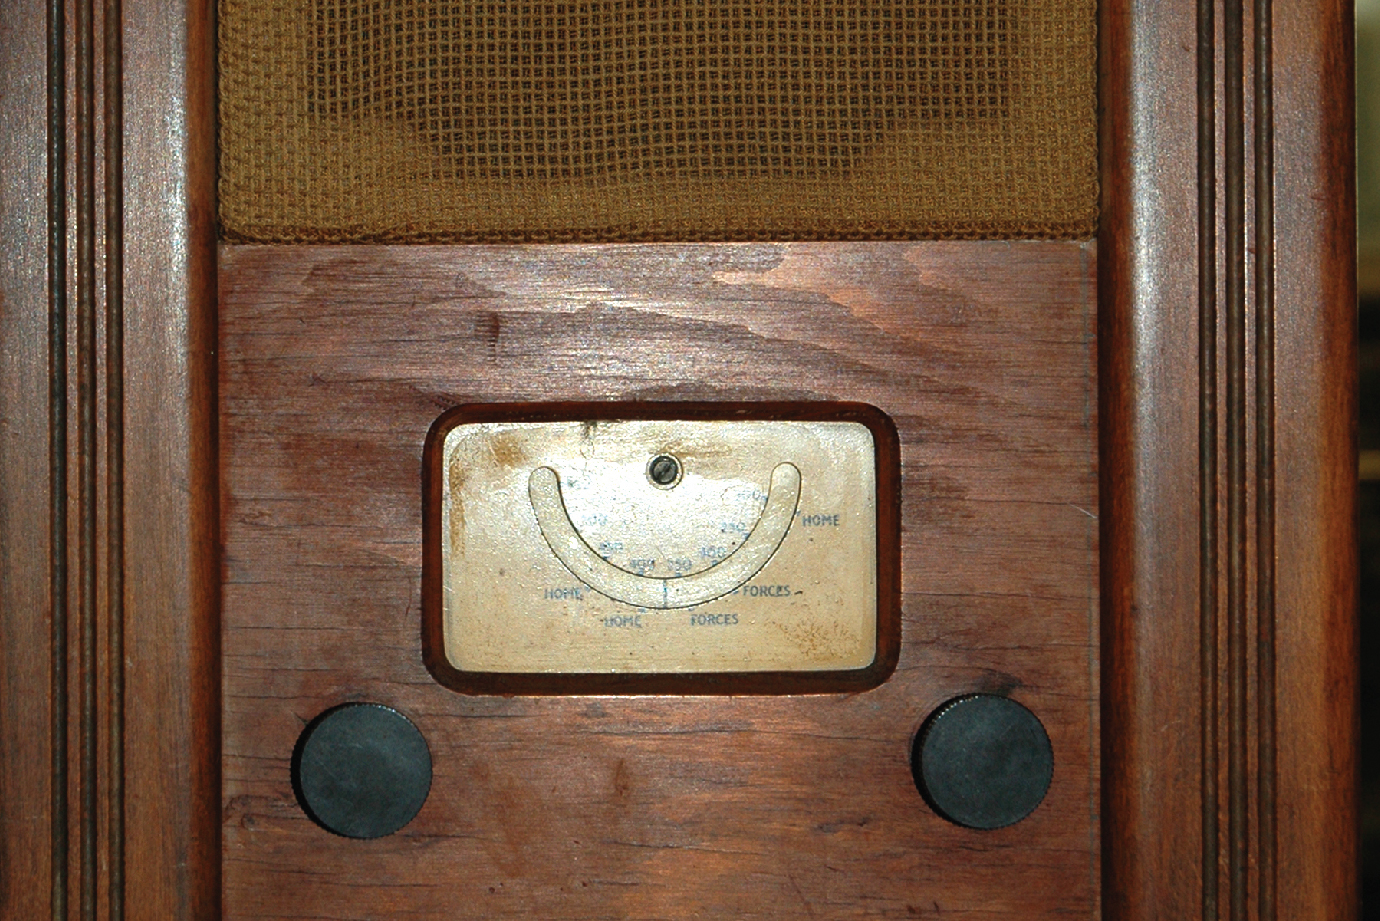 The front of a vintage radio